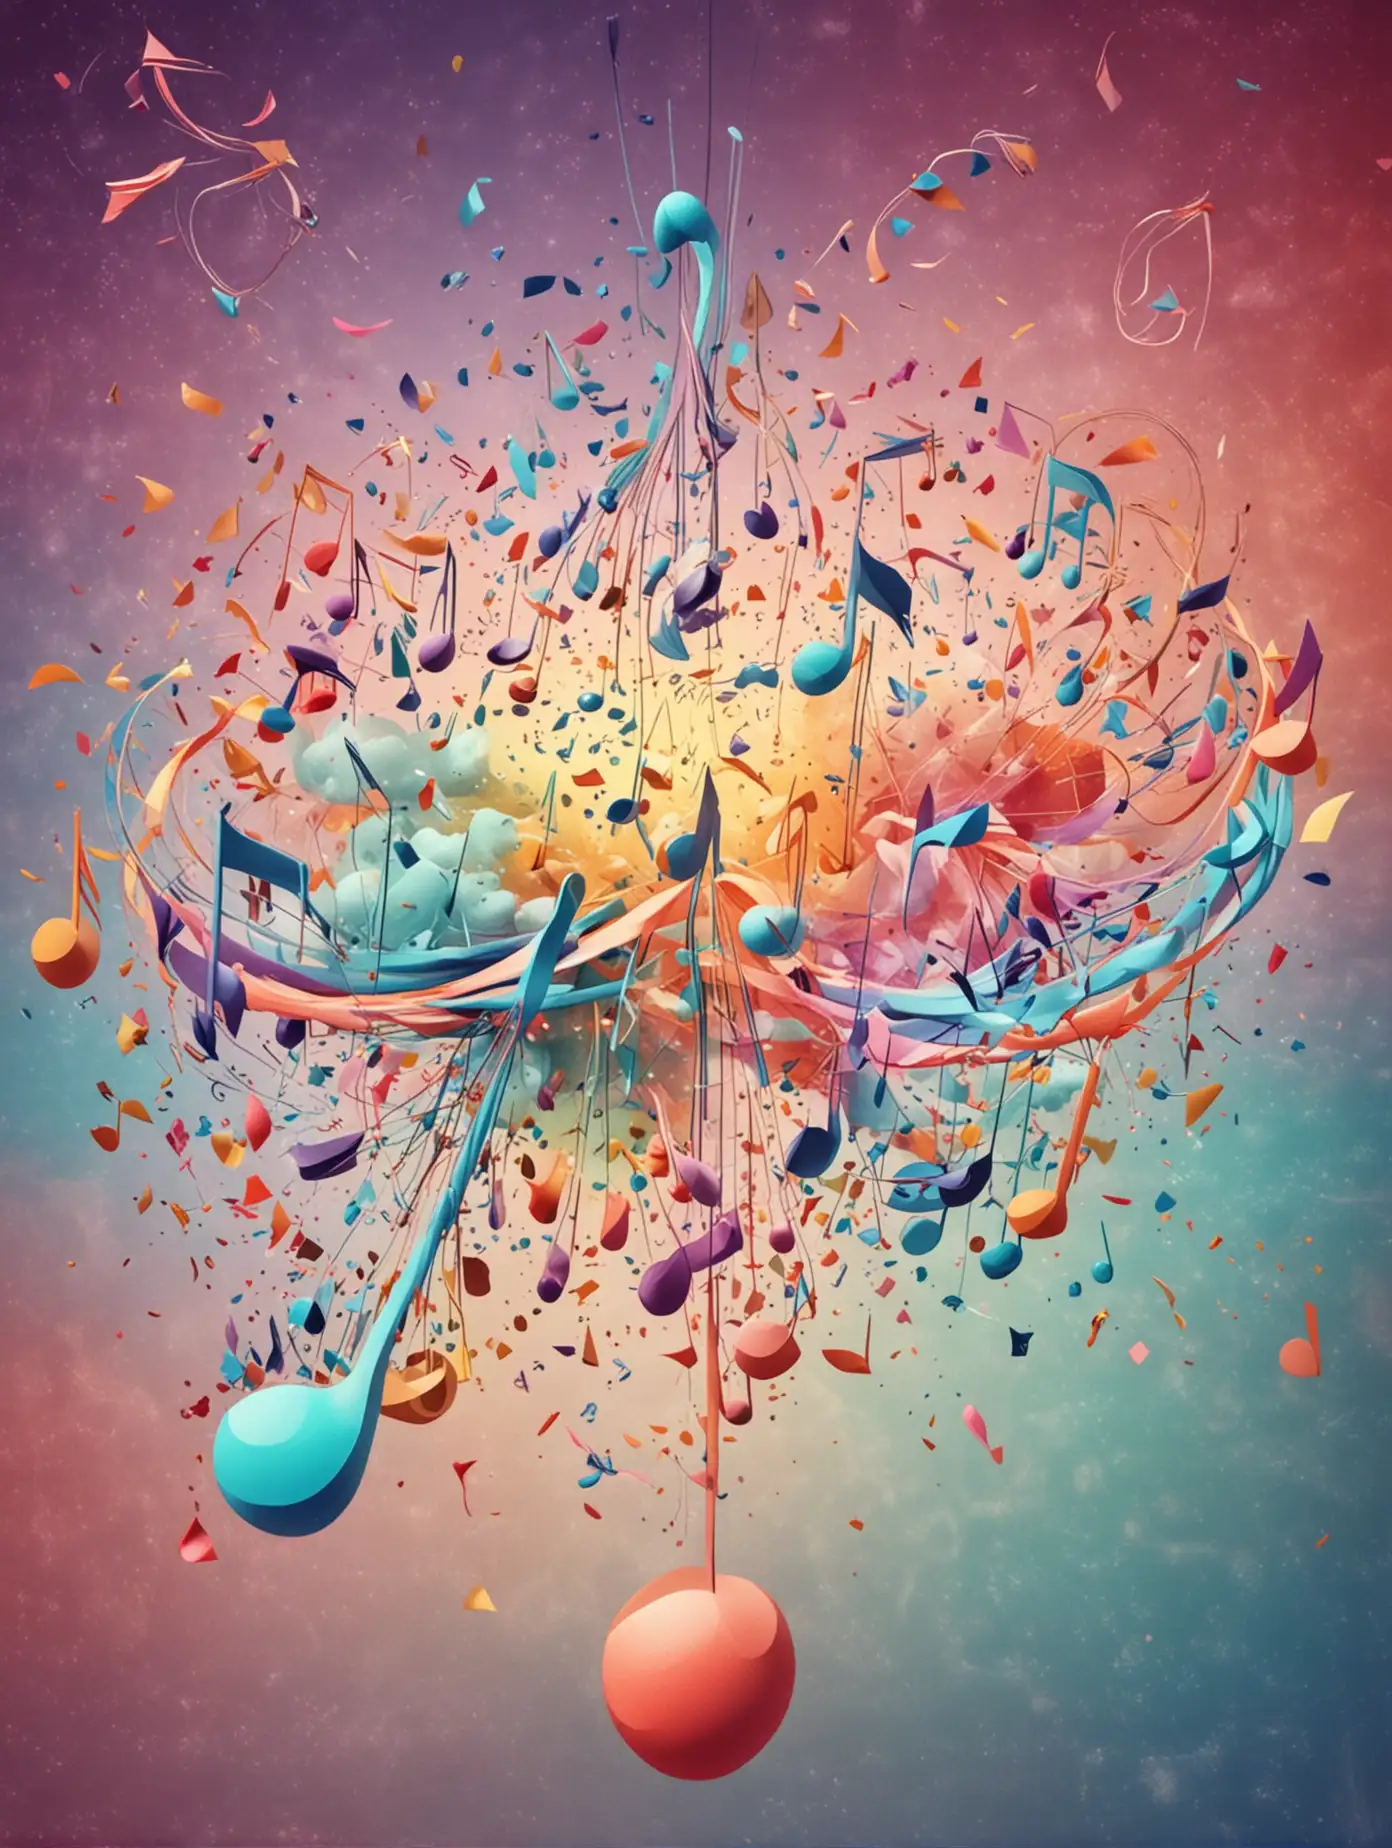 Abstract Music Notes and Geometric Elements with Dreamy Color Background